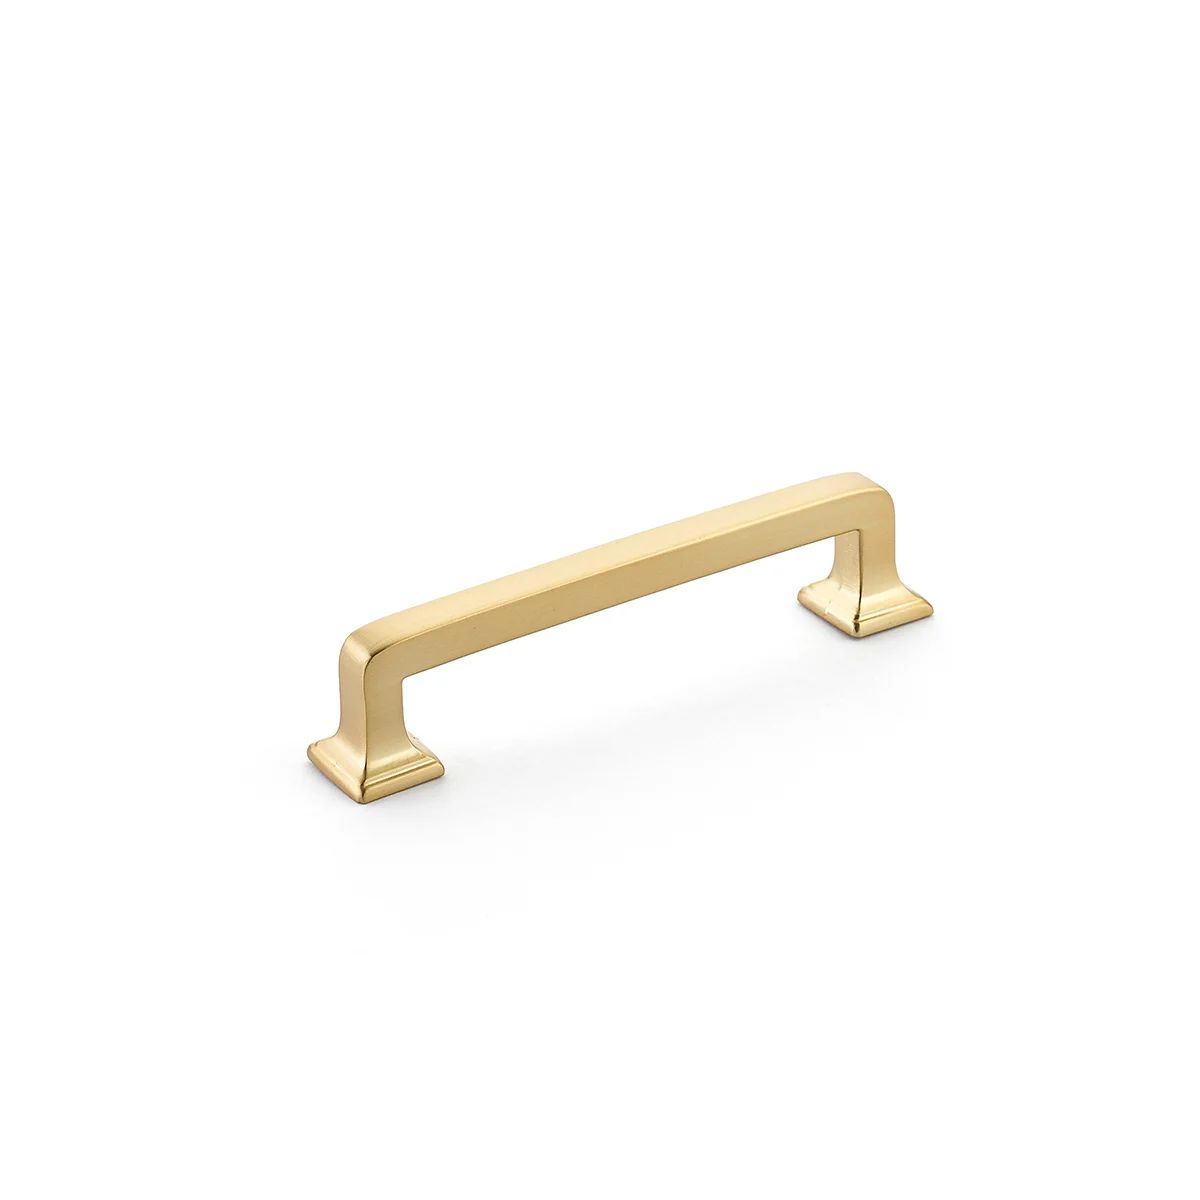 Schaub and Company Menlo Park 4 Inch Center to Center Handle Cabinet Pull with Rounded CornersMod... | Build.com, Inc.